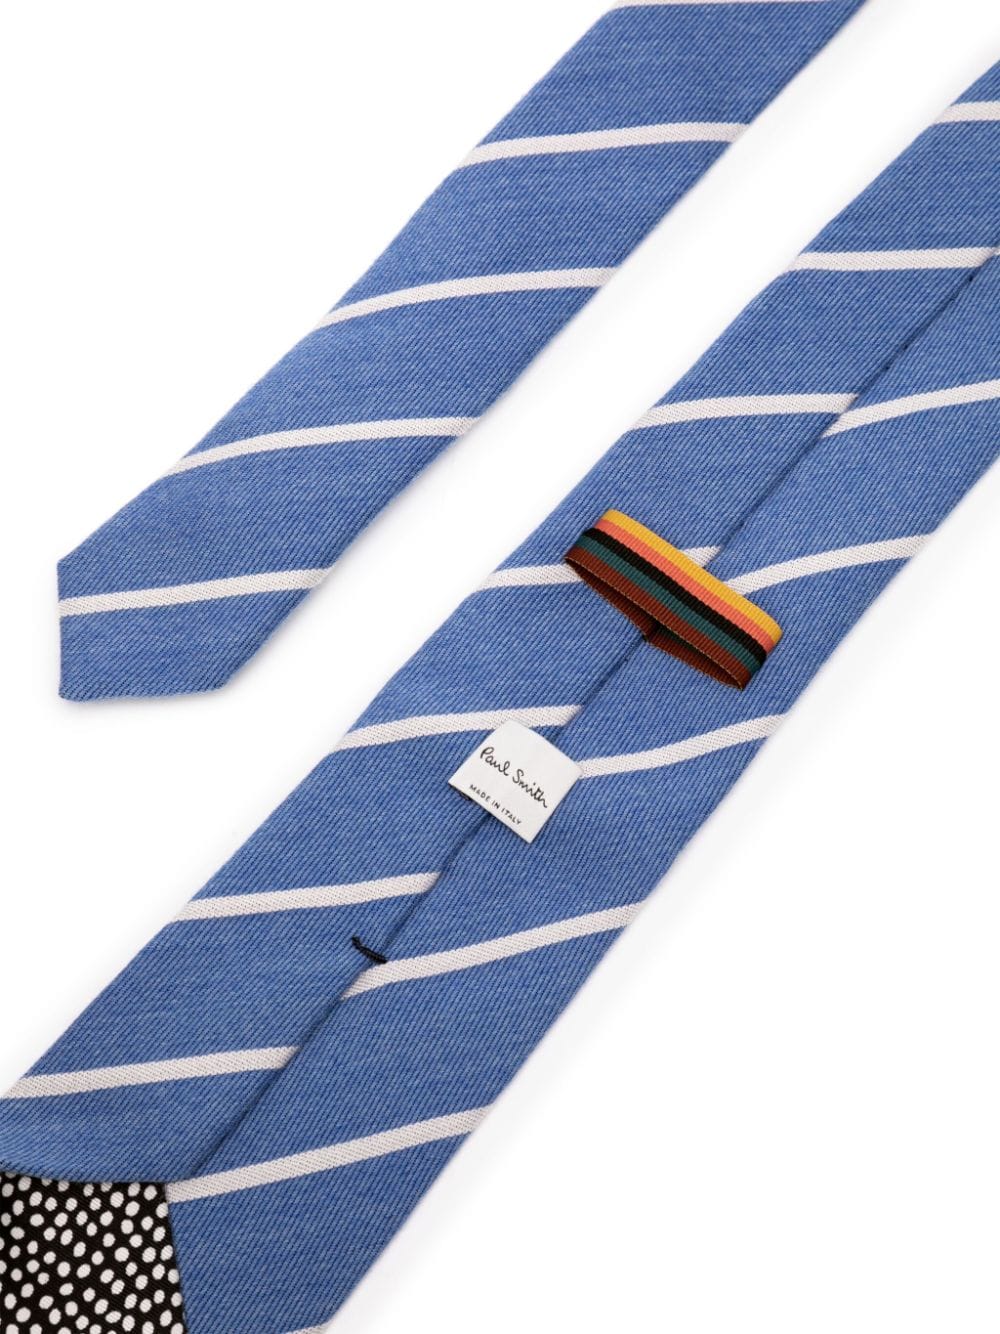 Paul Smith pointed-tip striped tie - Blauw